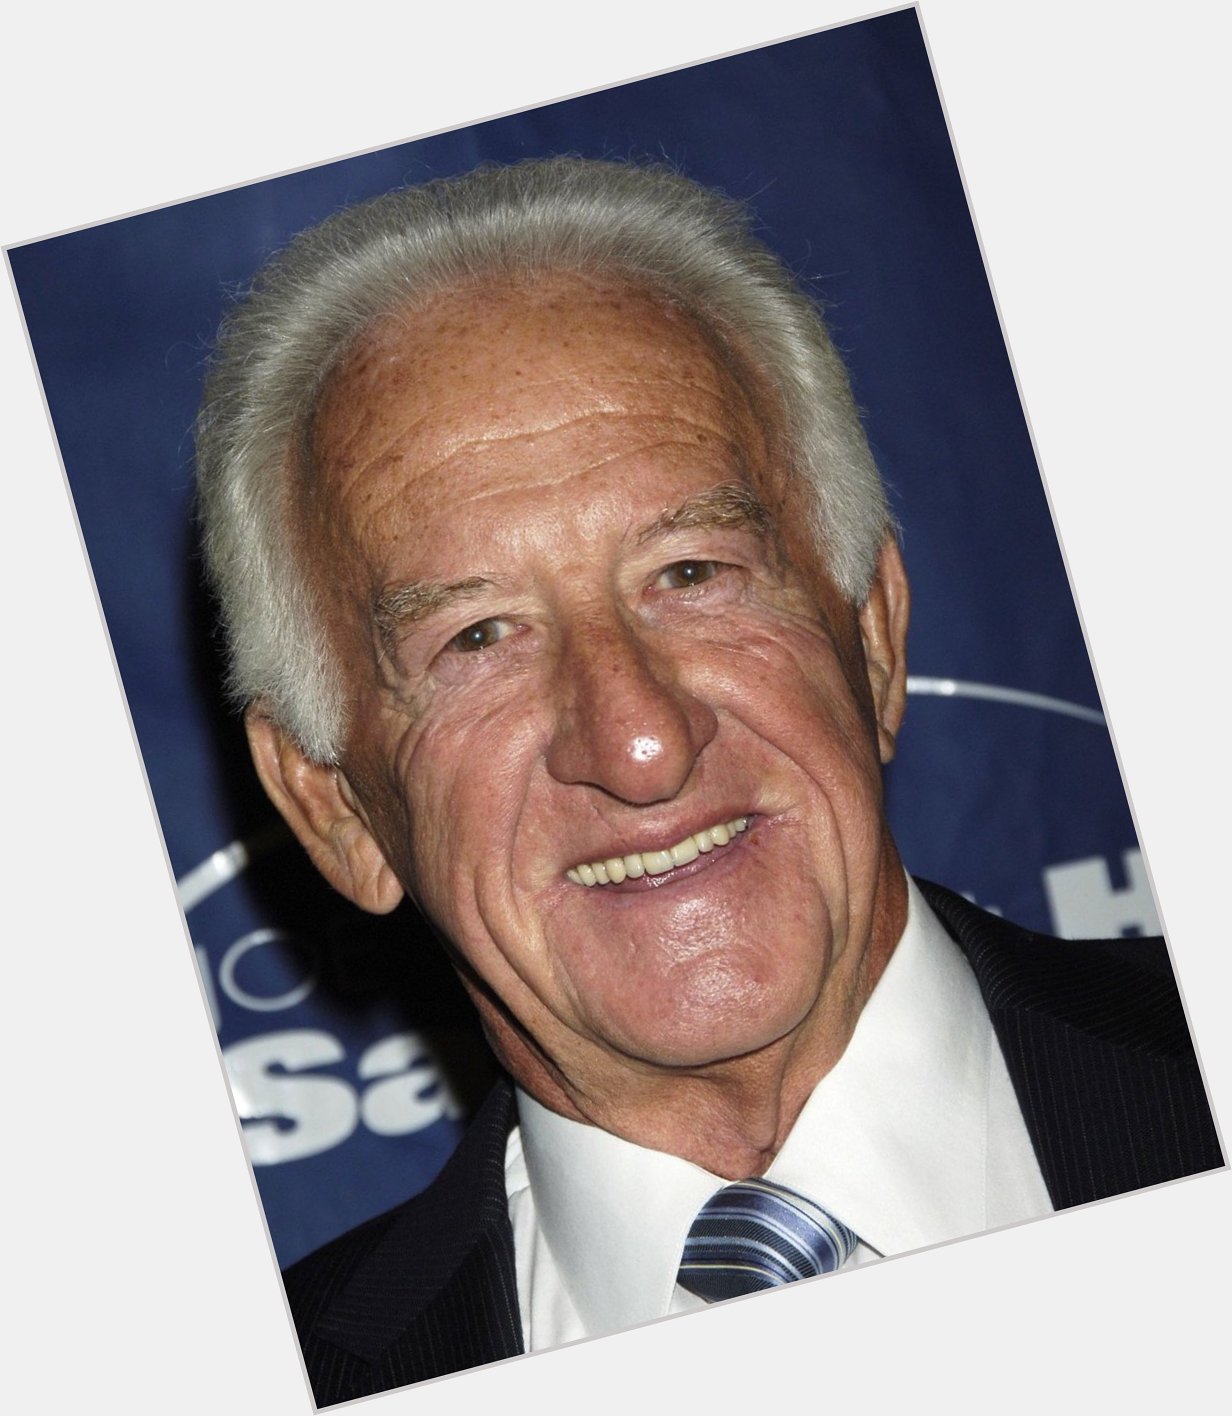 A very happy birthday to one of the best, funniest baseball guys ever, Mr. Bob Uecker. 